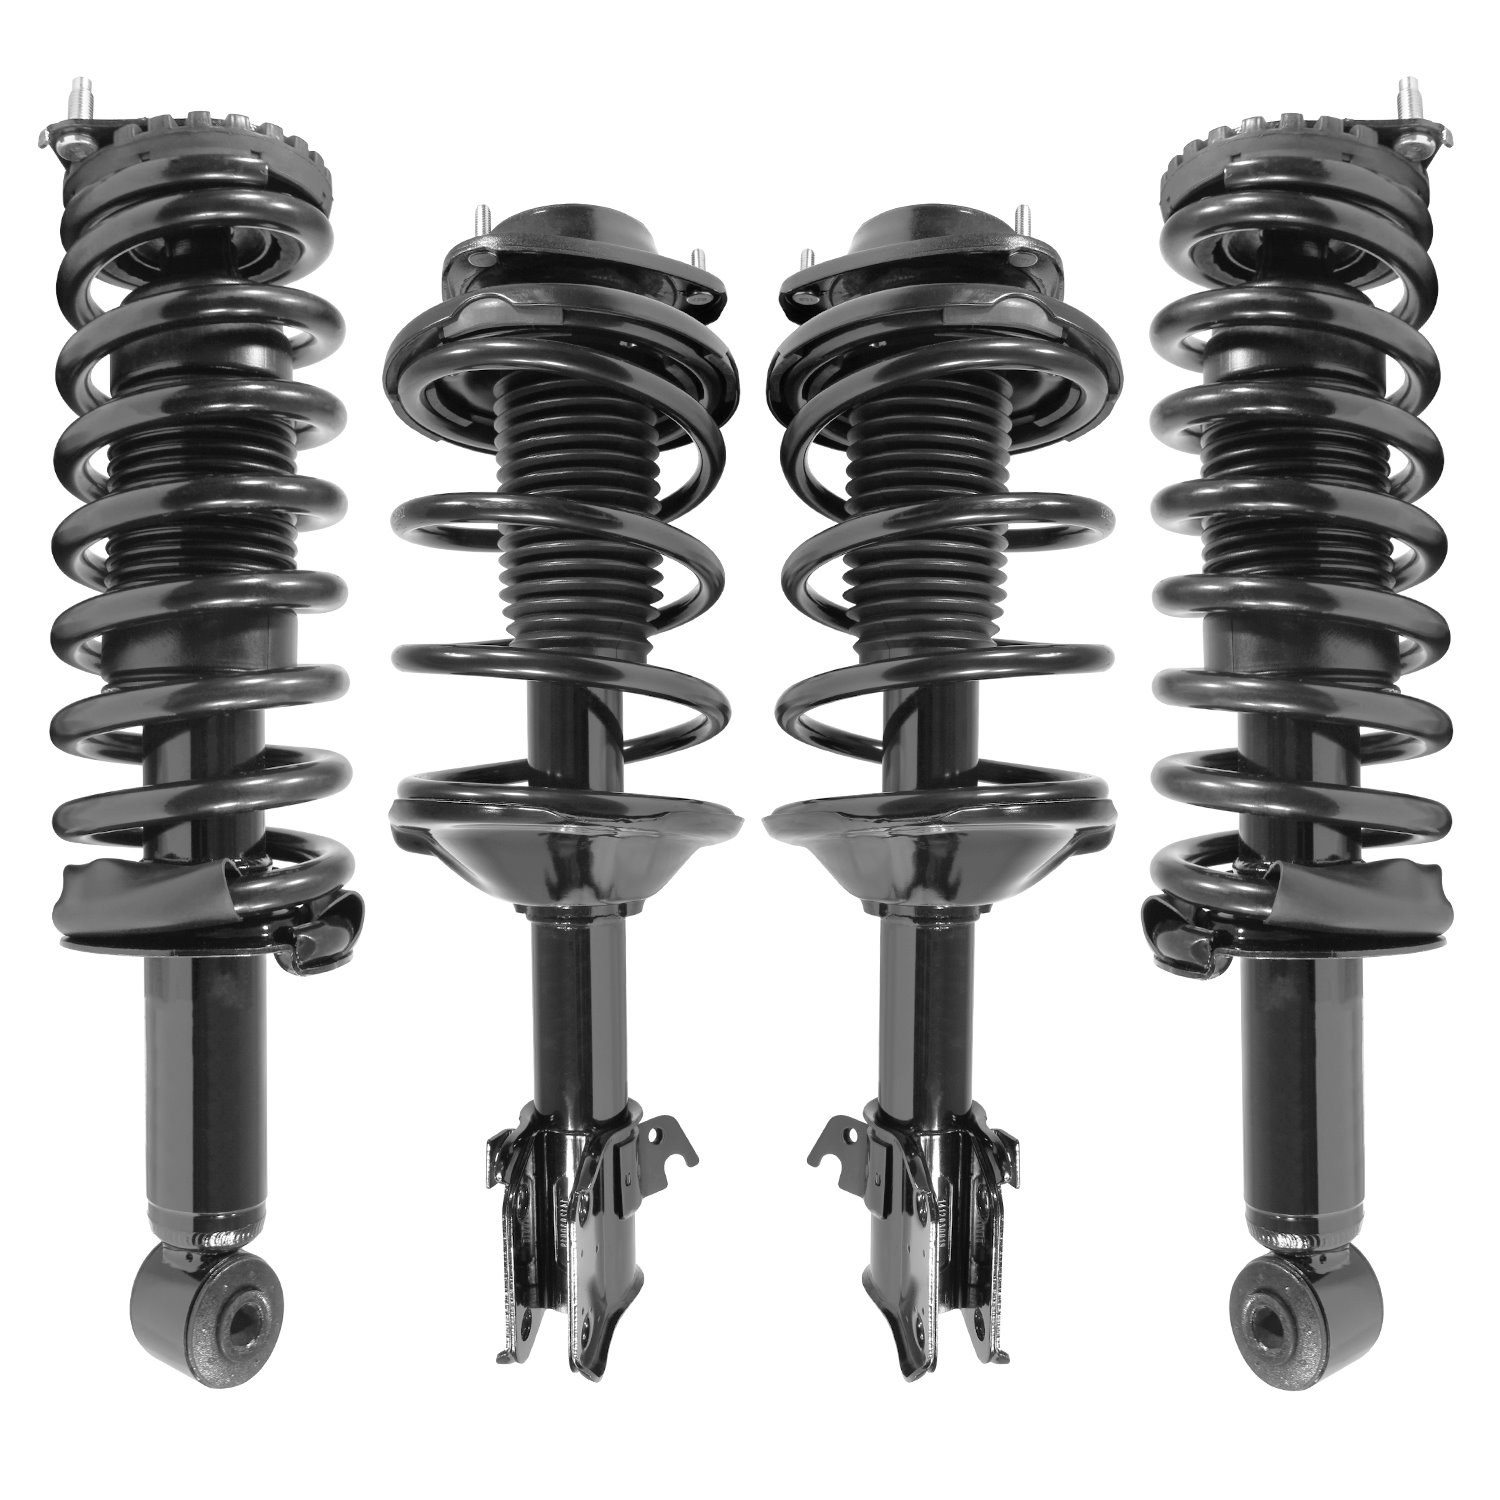 4-11851-15850-001 Front & Rear Suspension Strut & Coil Spring Assembly Kit Fits Select Subaru Legacy